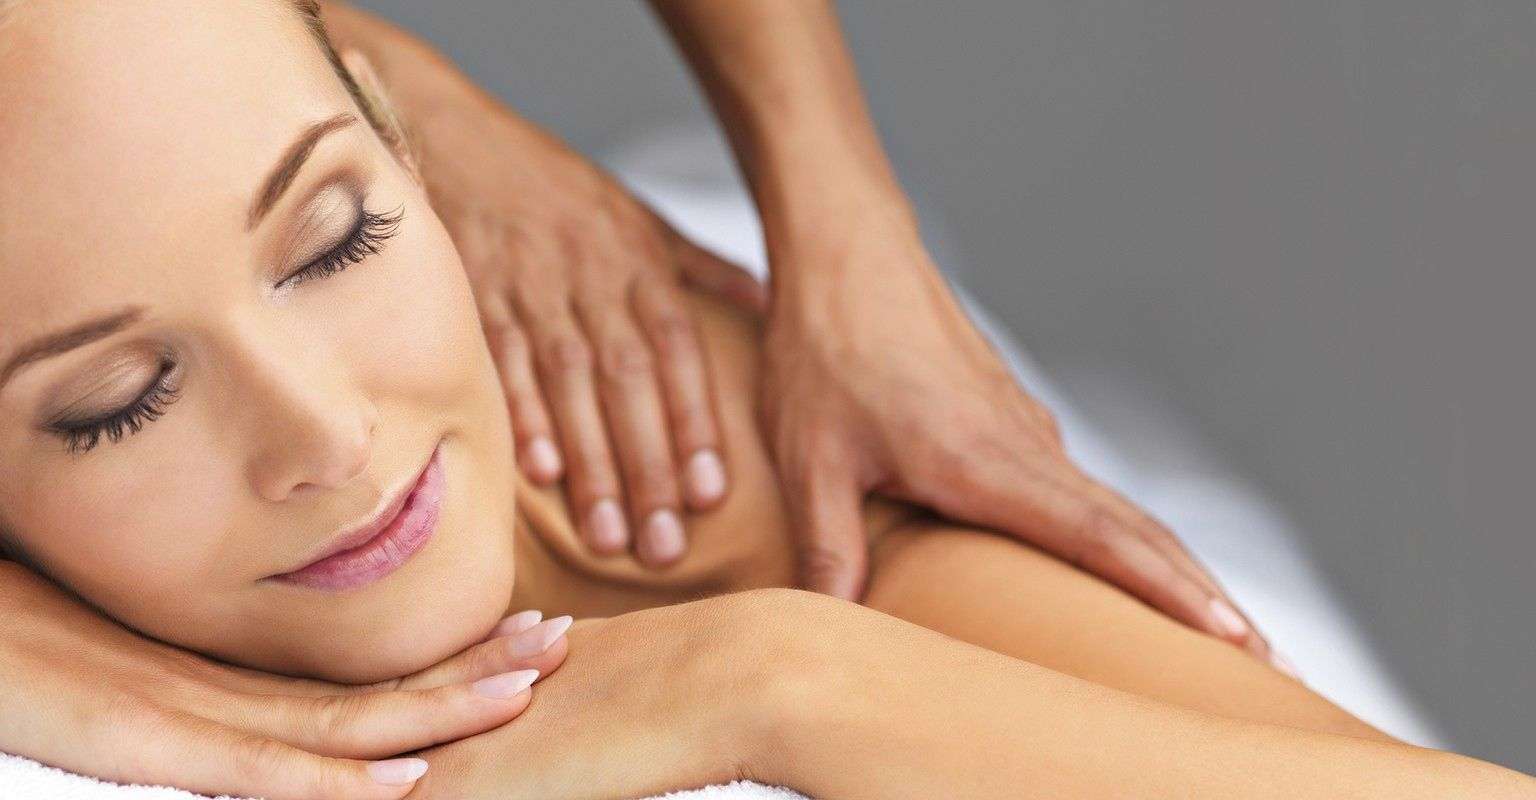 The 10 Best Swedish Massage Therapists in Fort Myers, FL 2021